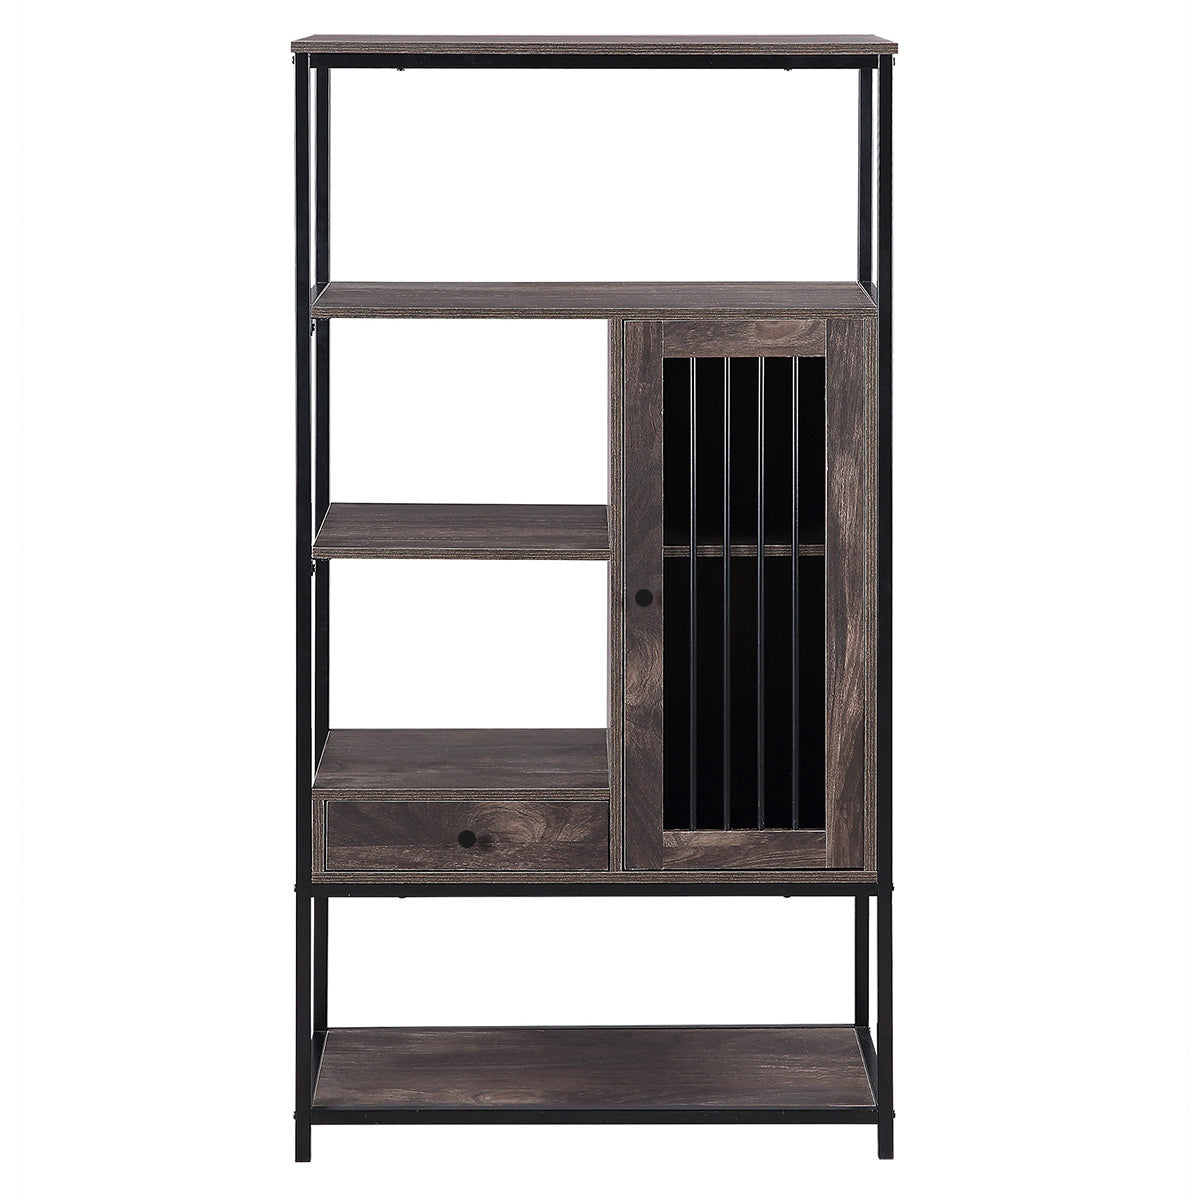 Home Office Bookcase and Bookshelf 5 Tier Display Shelf with Doors and Drawers, Freestanding Multi-functional Decorative Storage Shelving, Vintage Brown Industrial Style (Brown)